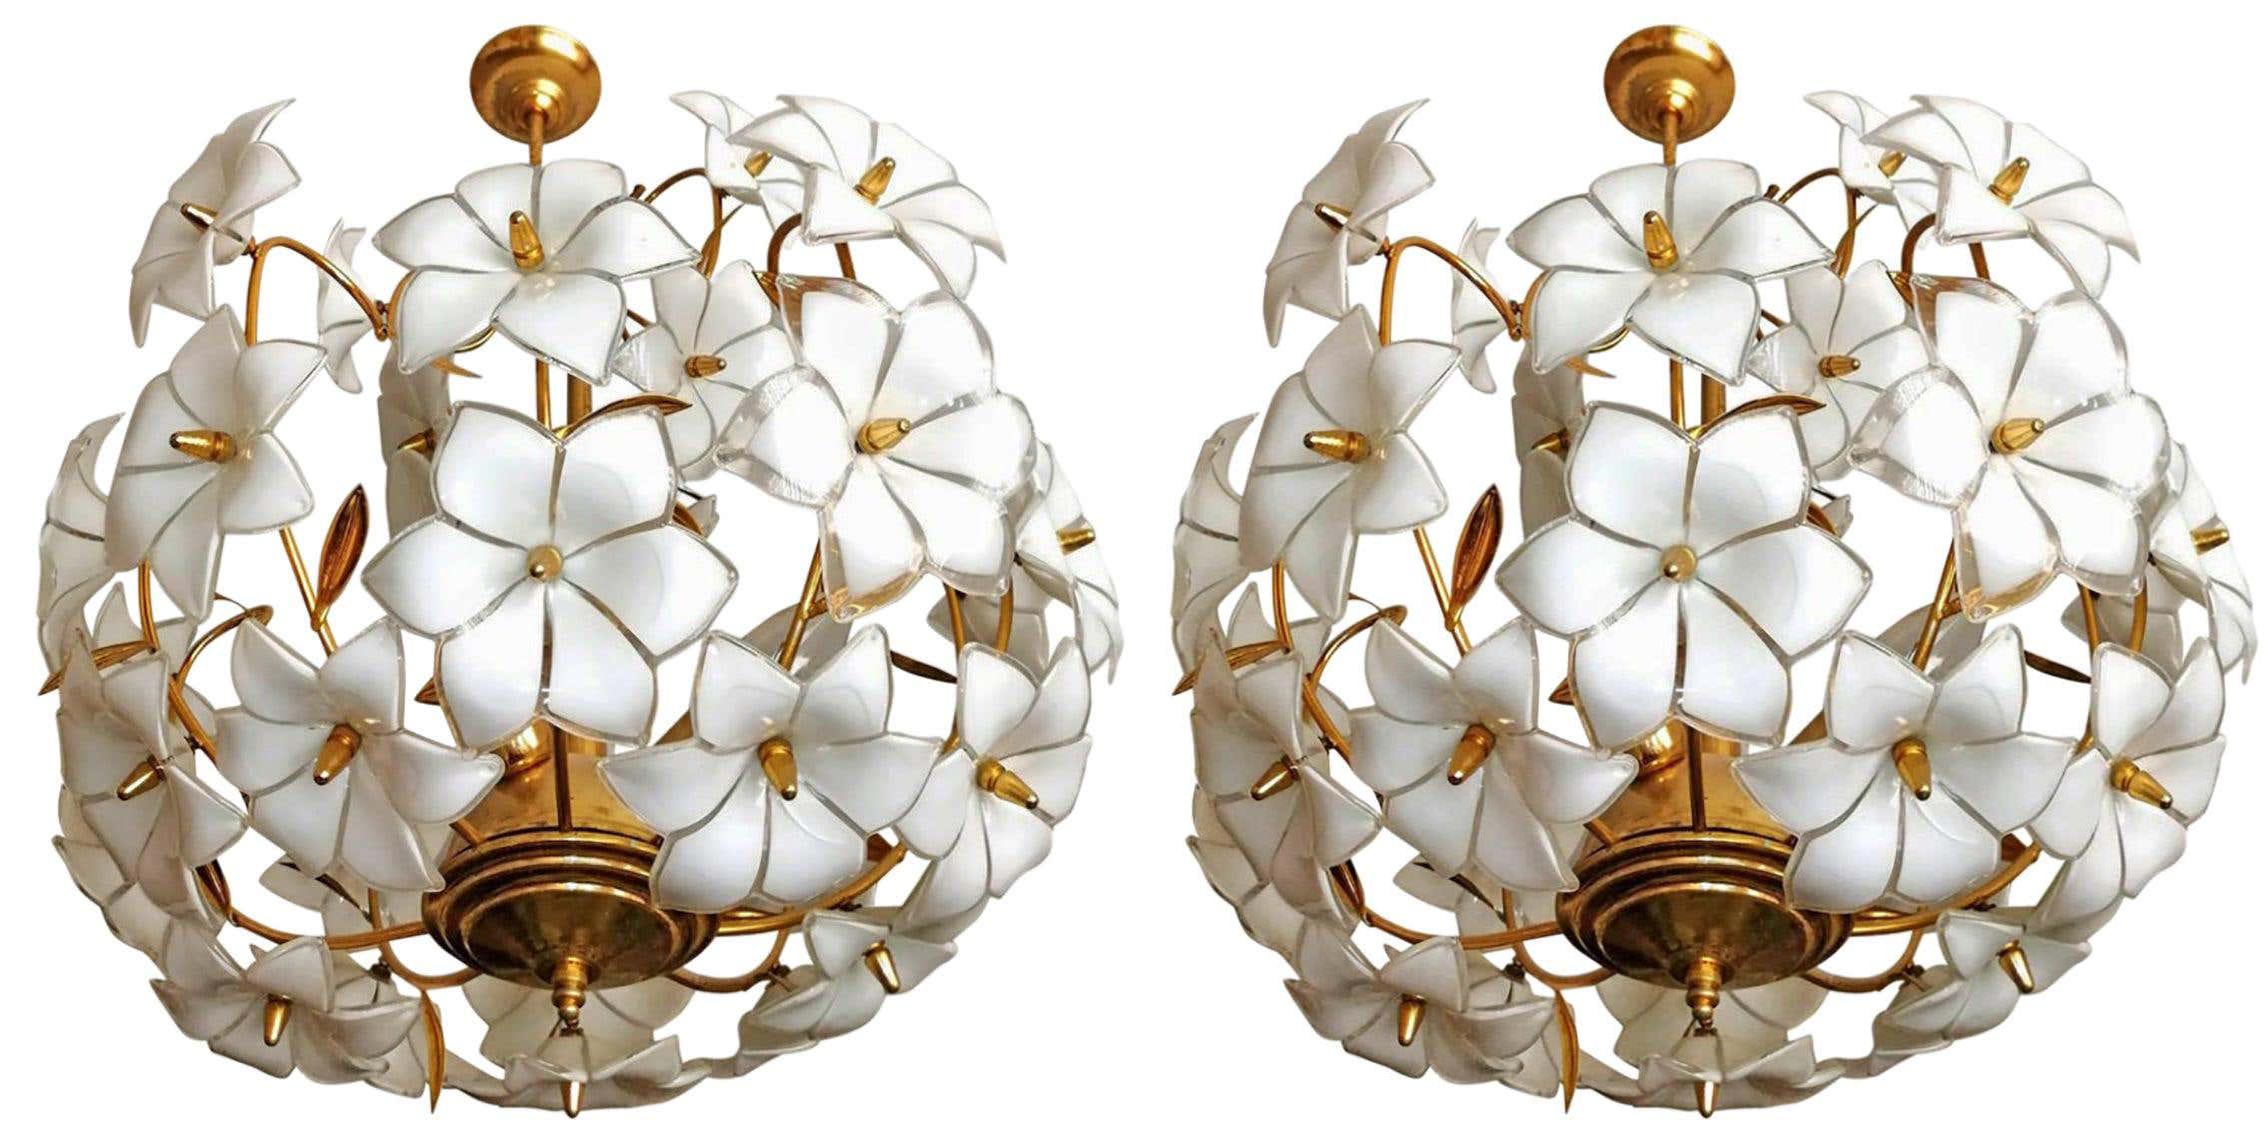 Italian Murano flower bouquet in the style of Venini art-glass with 36 hand-blow white and clear glass flowers and gold-plated brass. A few missing leaves. A pair available. 
Dimensions:
Diameter 20 in/ 50 cm
Height 32 in/ 80 cm
Weight: 18 lb/8